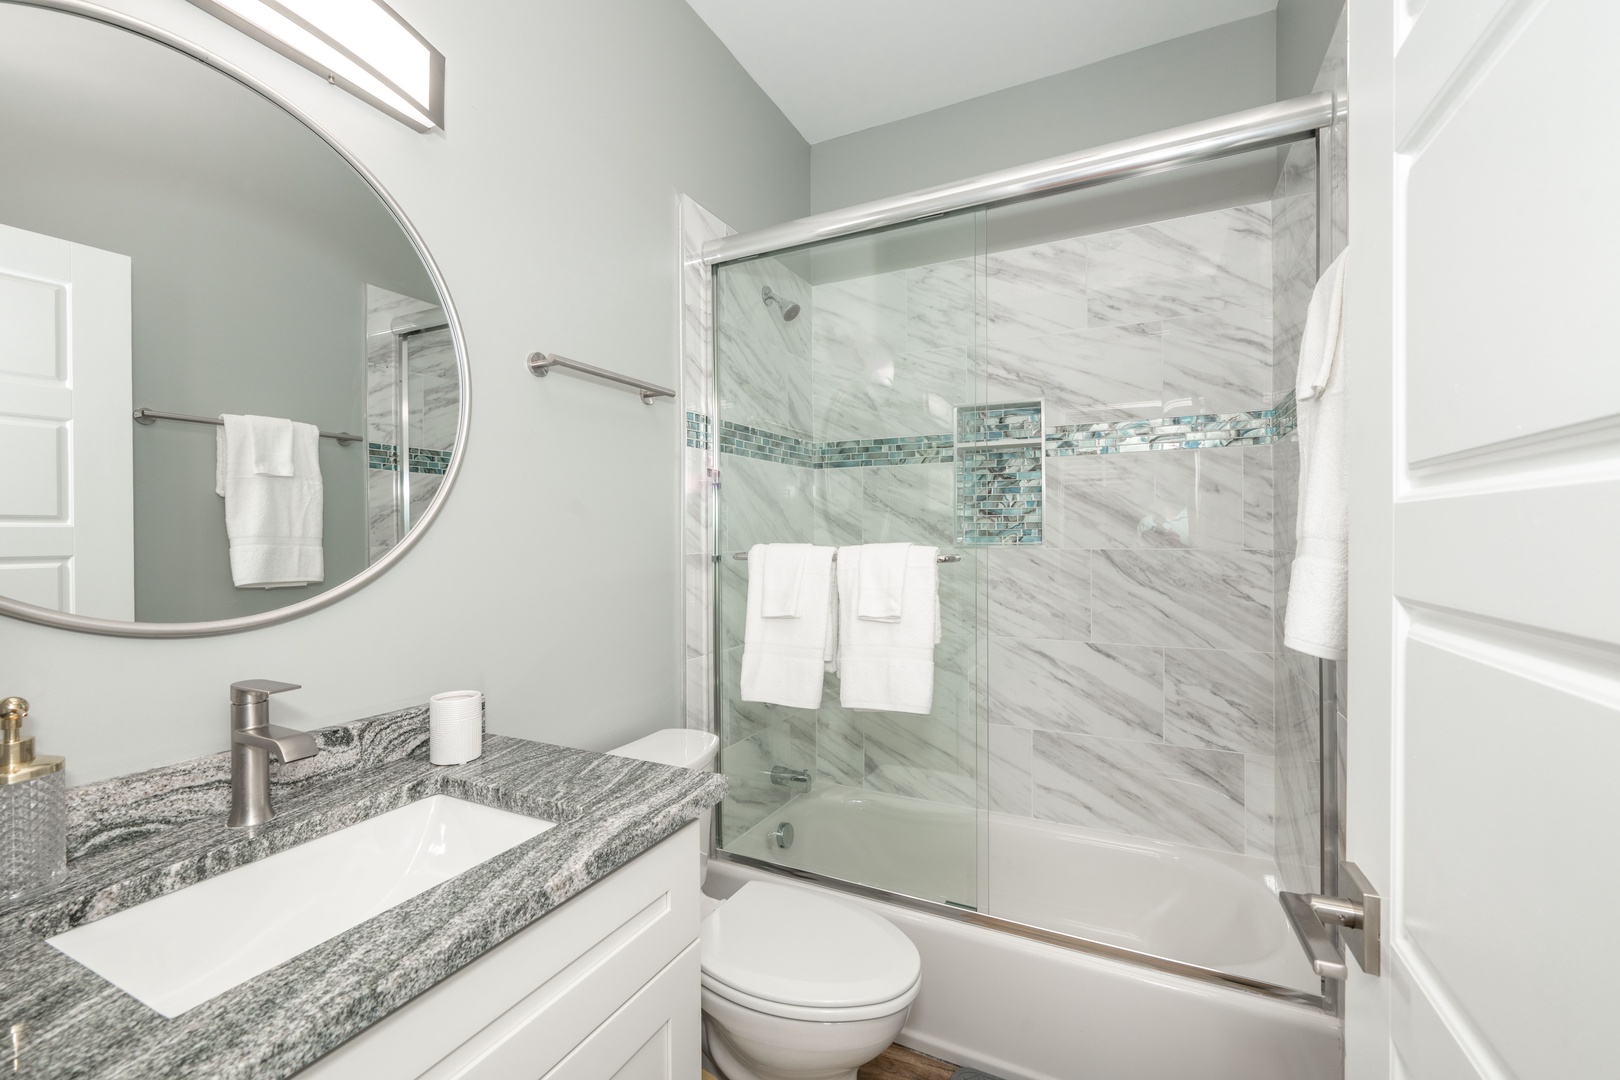 The polished full bathroom includes a single vanity & shower/tub combo